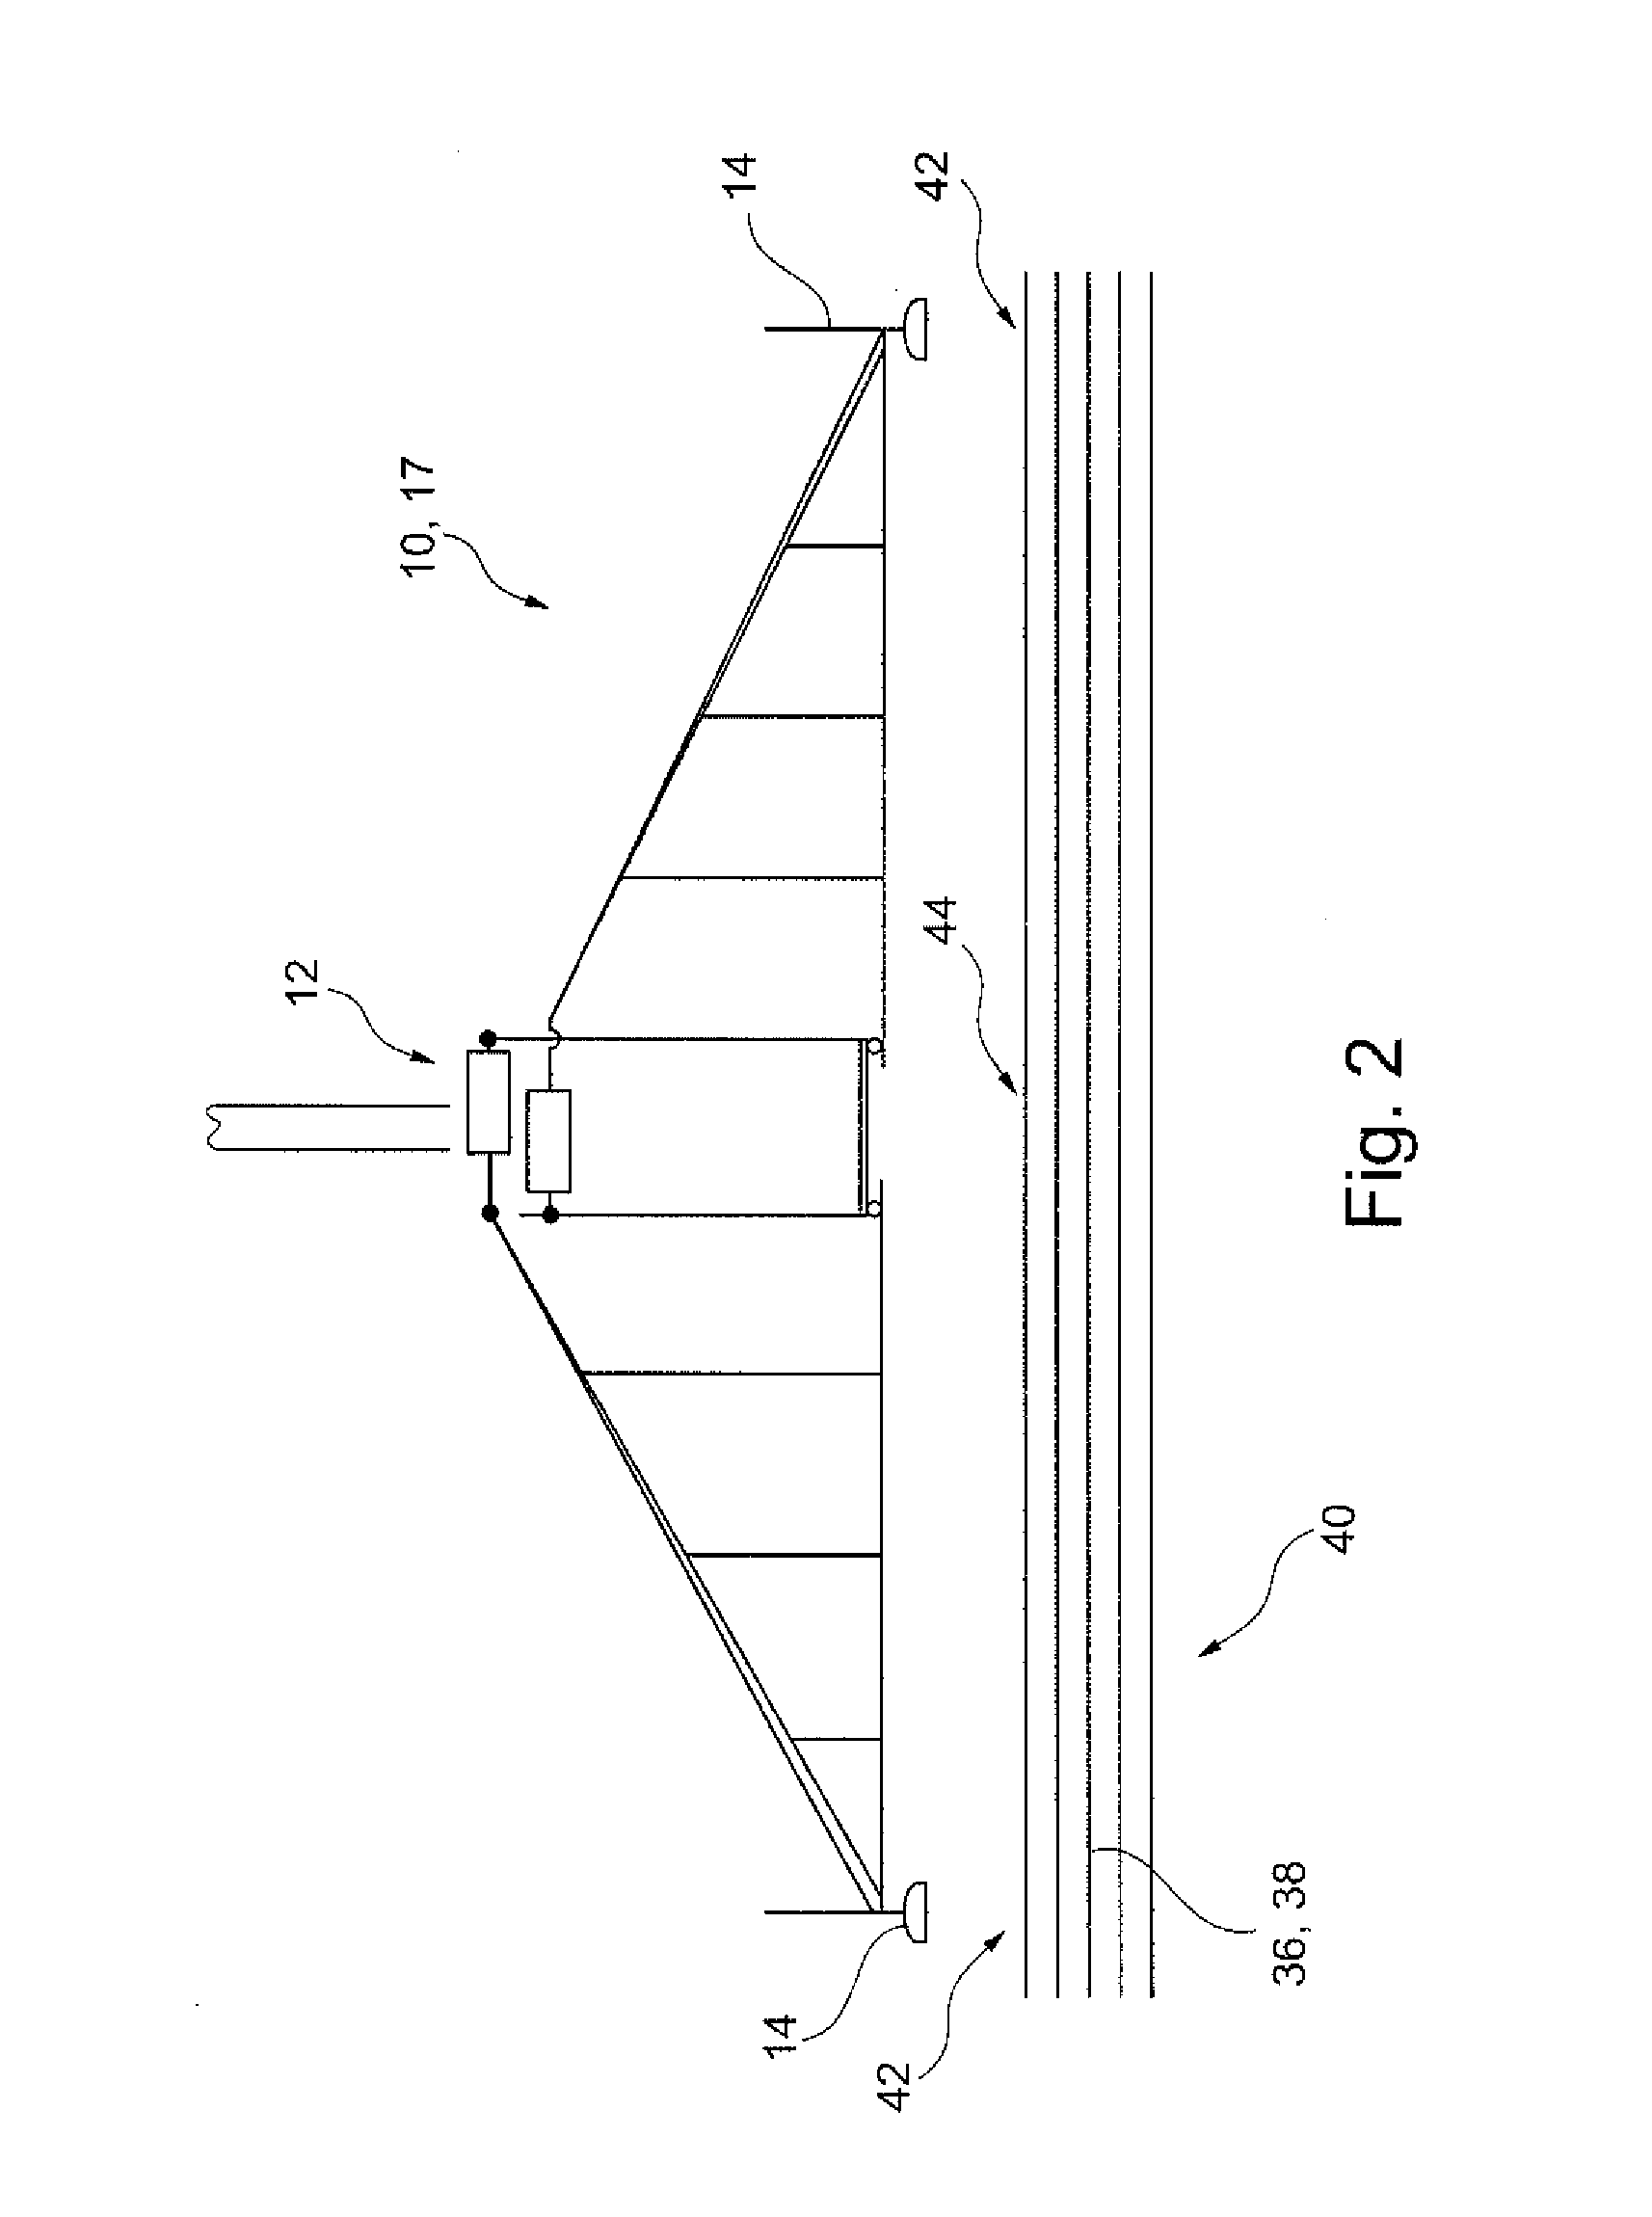 Device and method for receiving, holding and/or handling two-dimensional objects